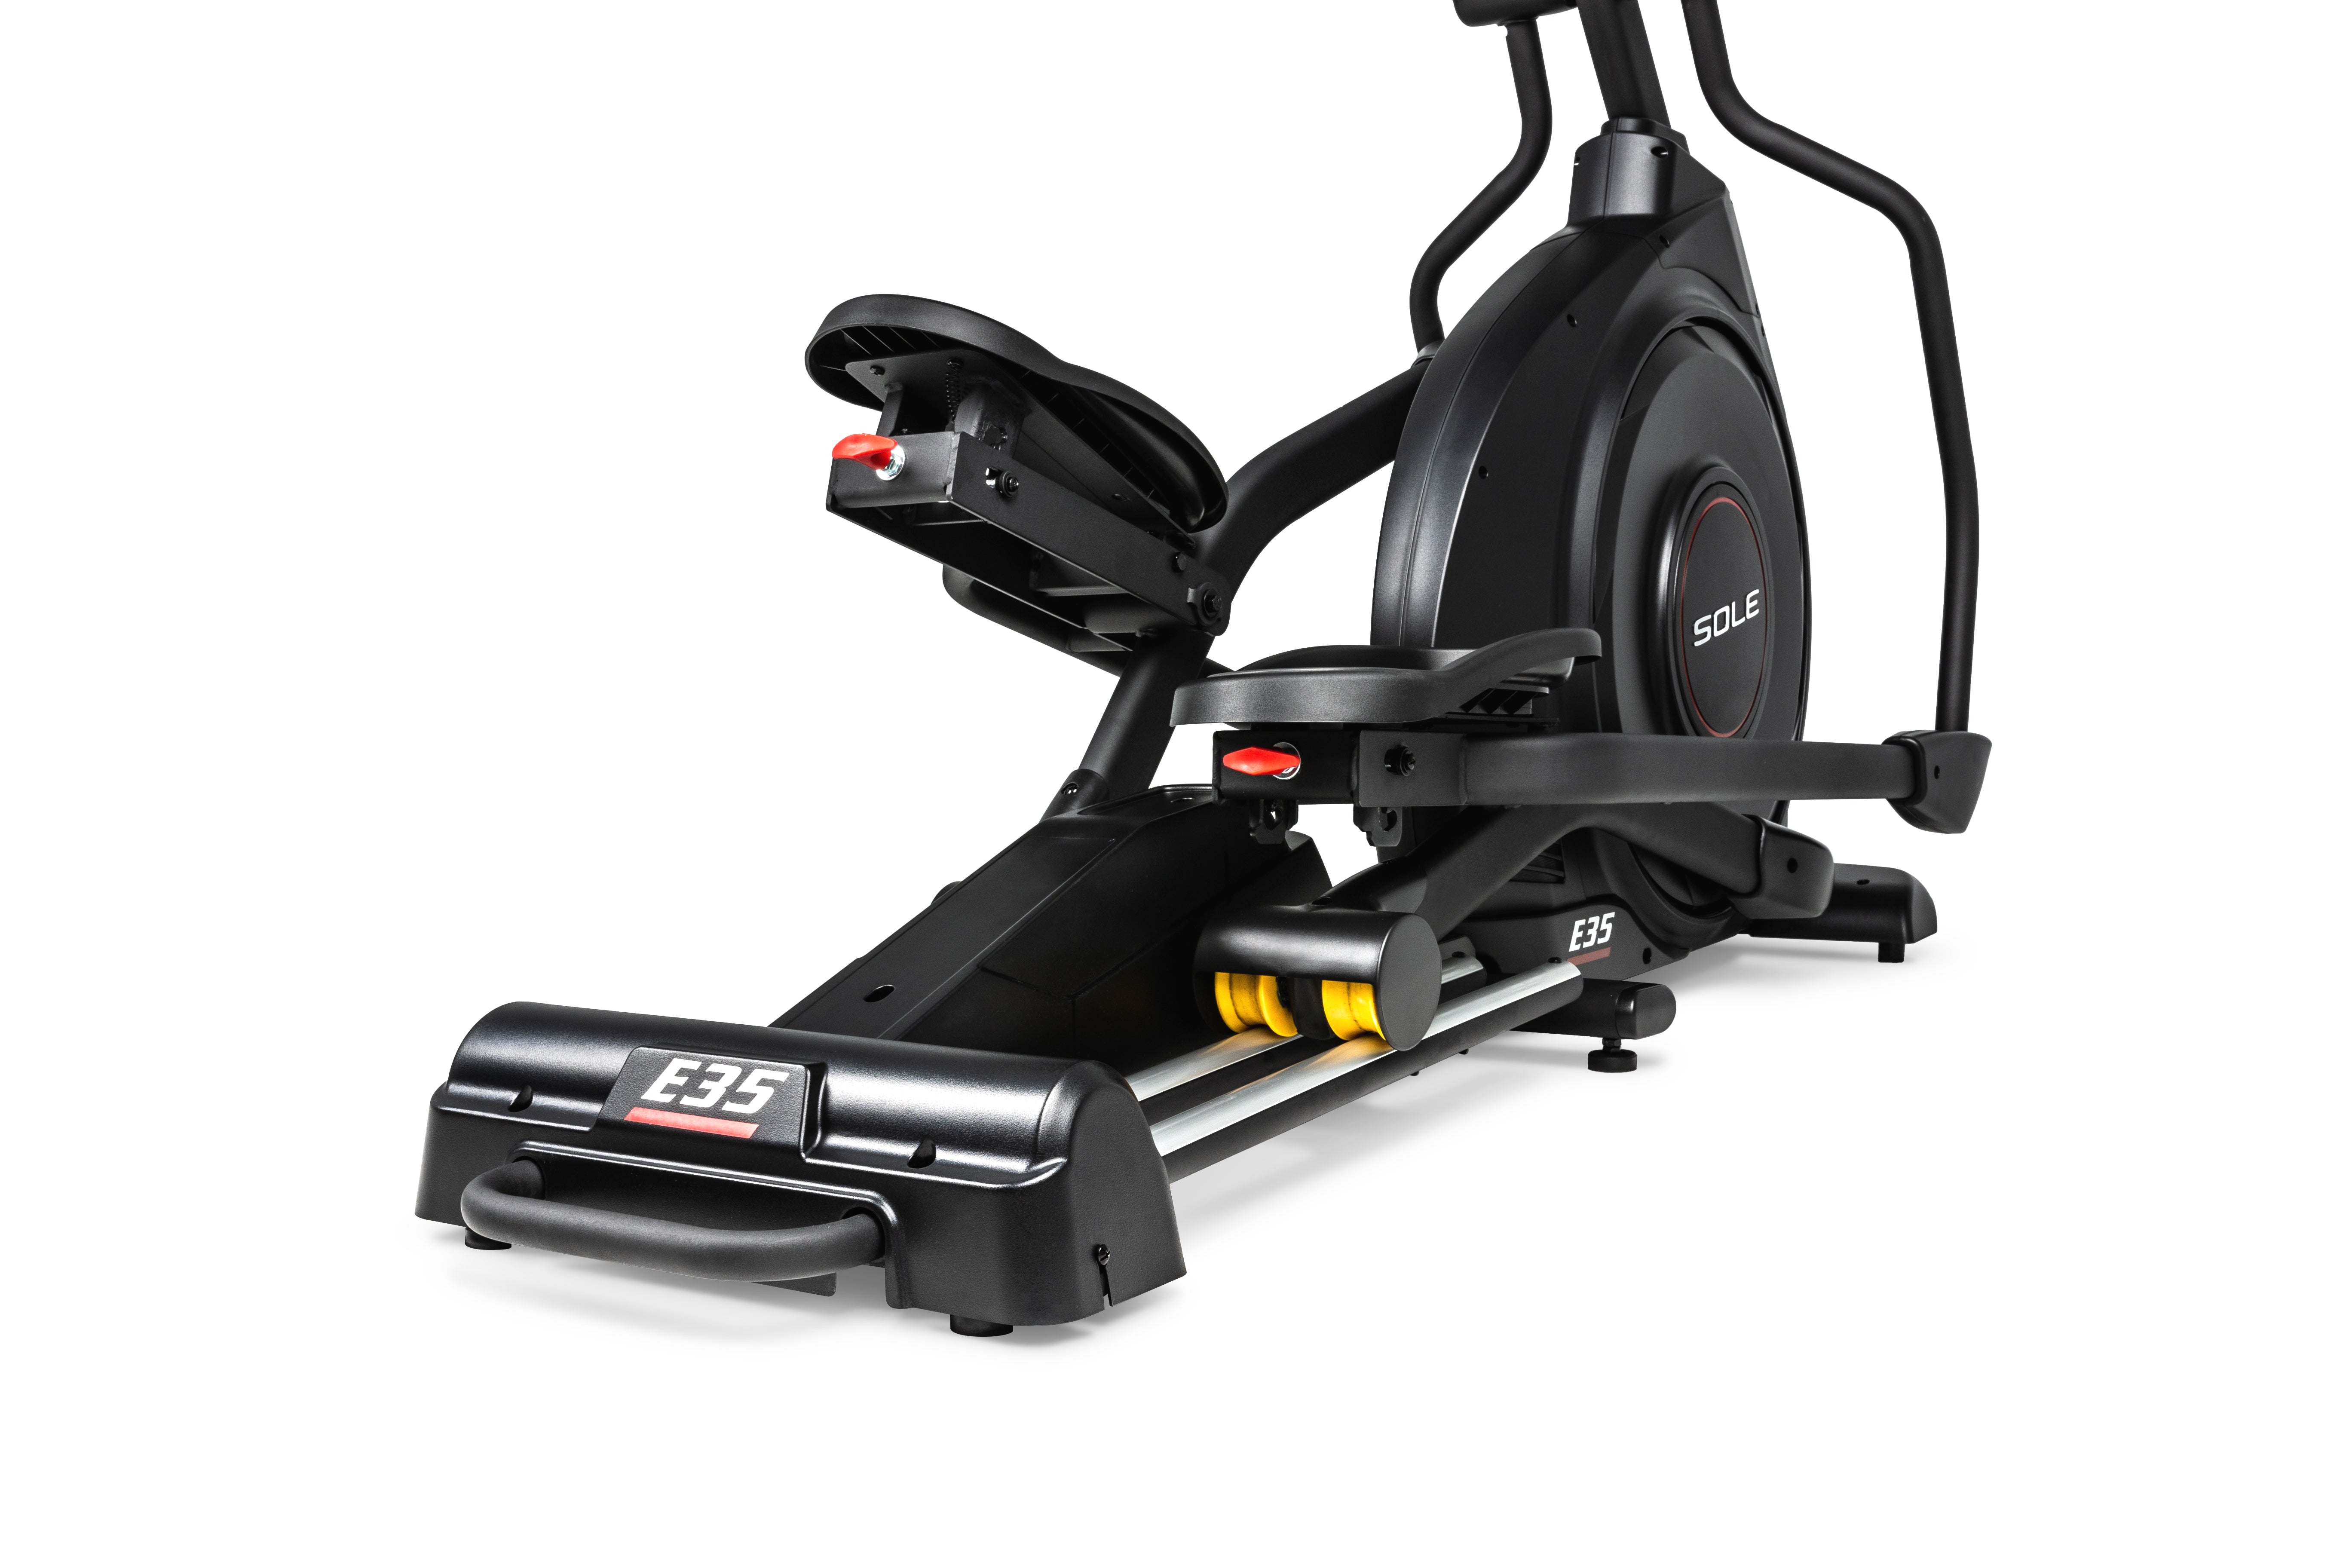 Side view of a Sole E35 elliptical trainer showcasing its pedals, handlebars, and flywheel.